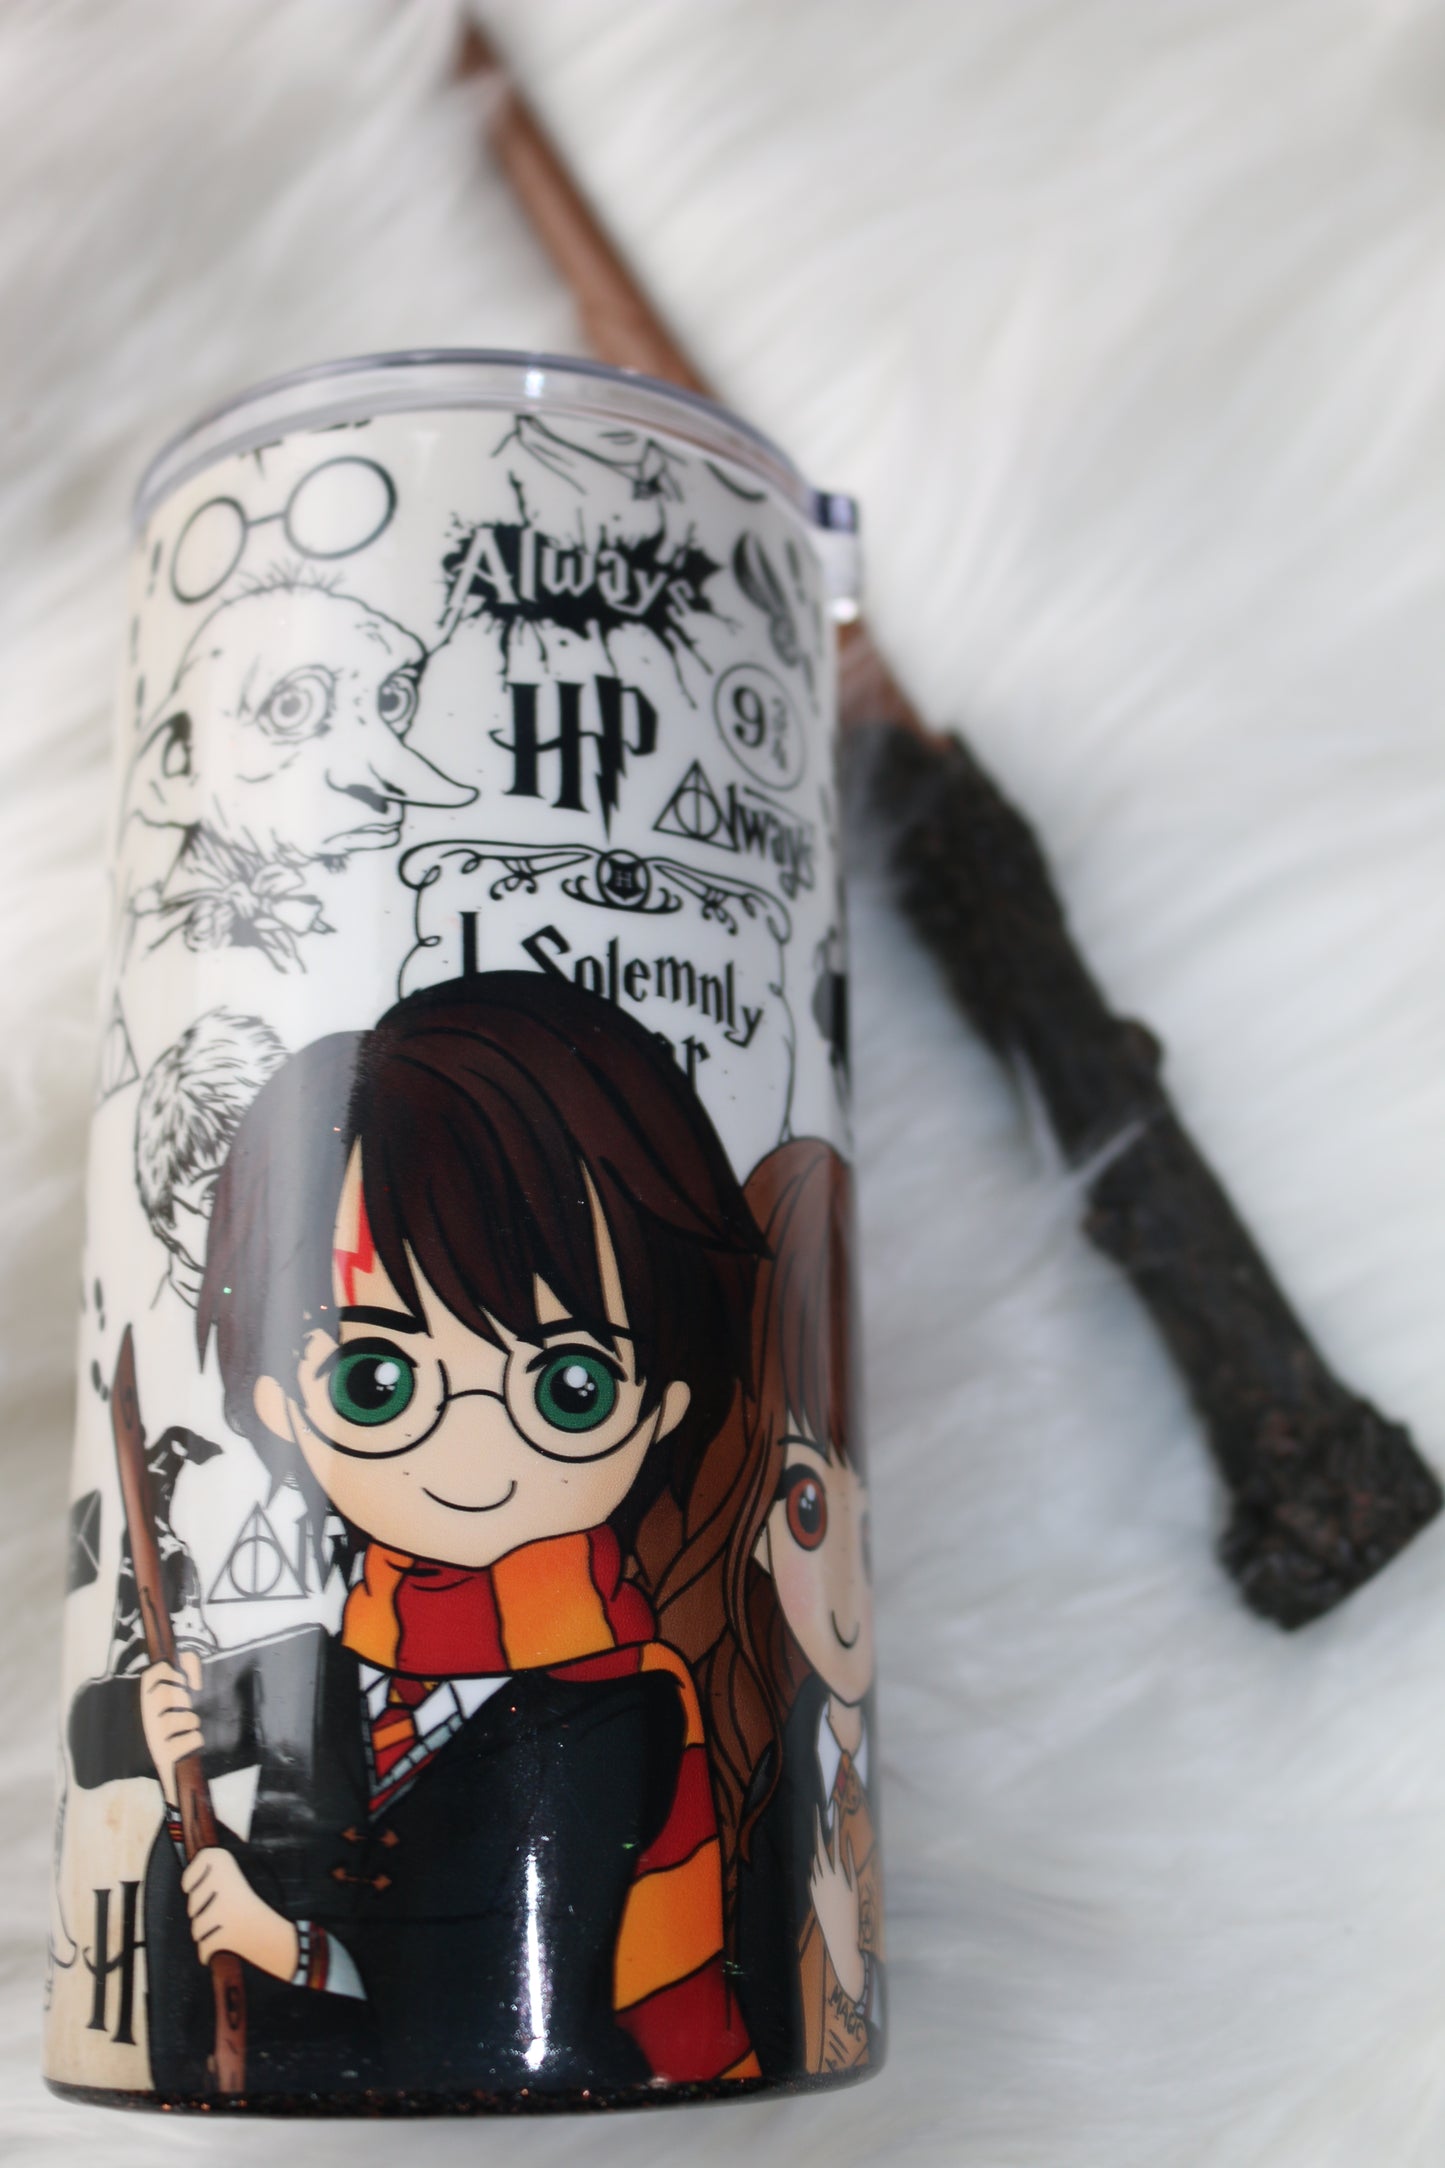 16 oz "Wizarding World" Stainless Steal Tumbler